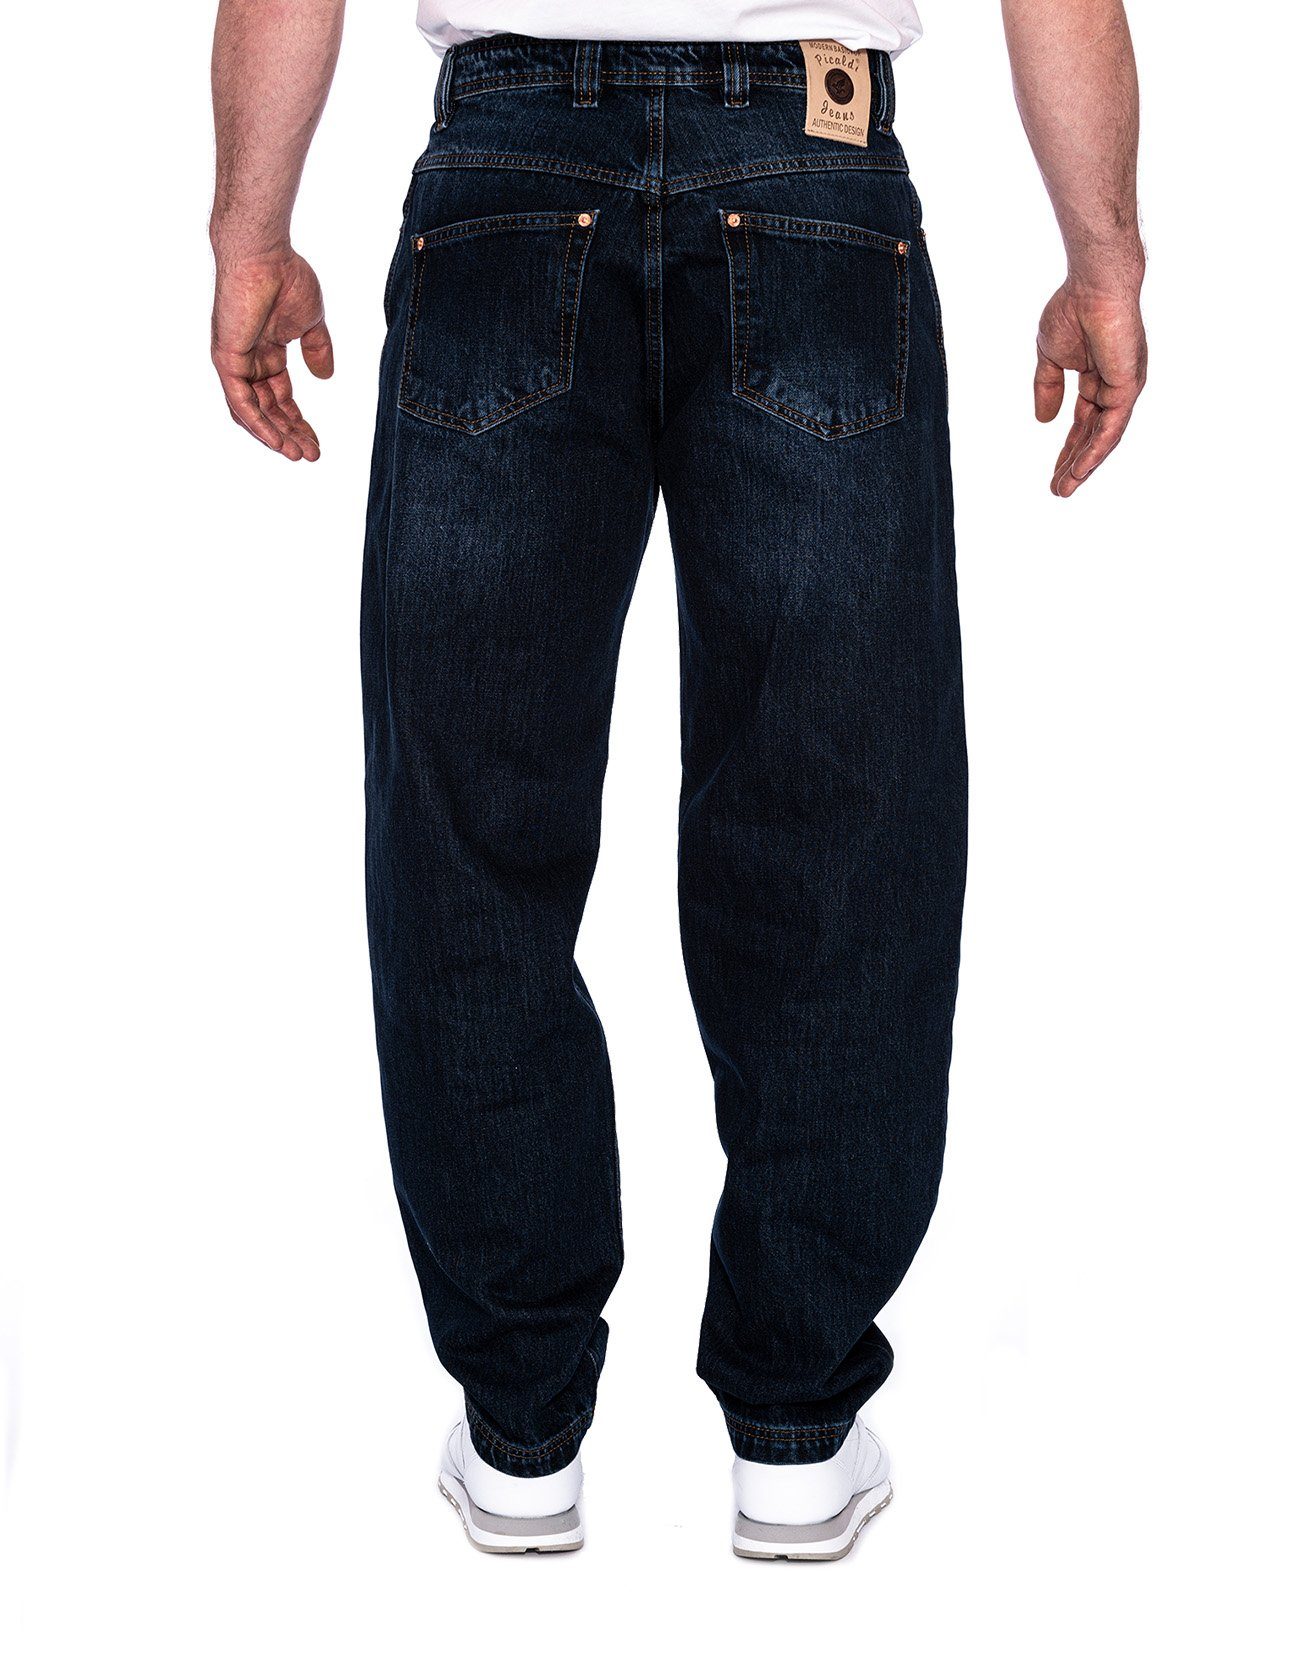 Hurricane Zicco Jeans PICALDI Pocket Fit, Jeans Loose Jeans 471 Five Weite